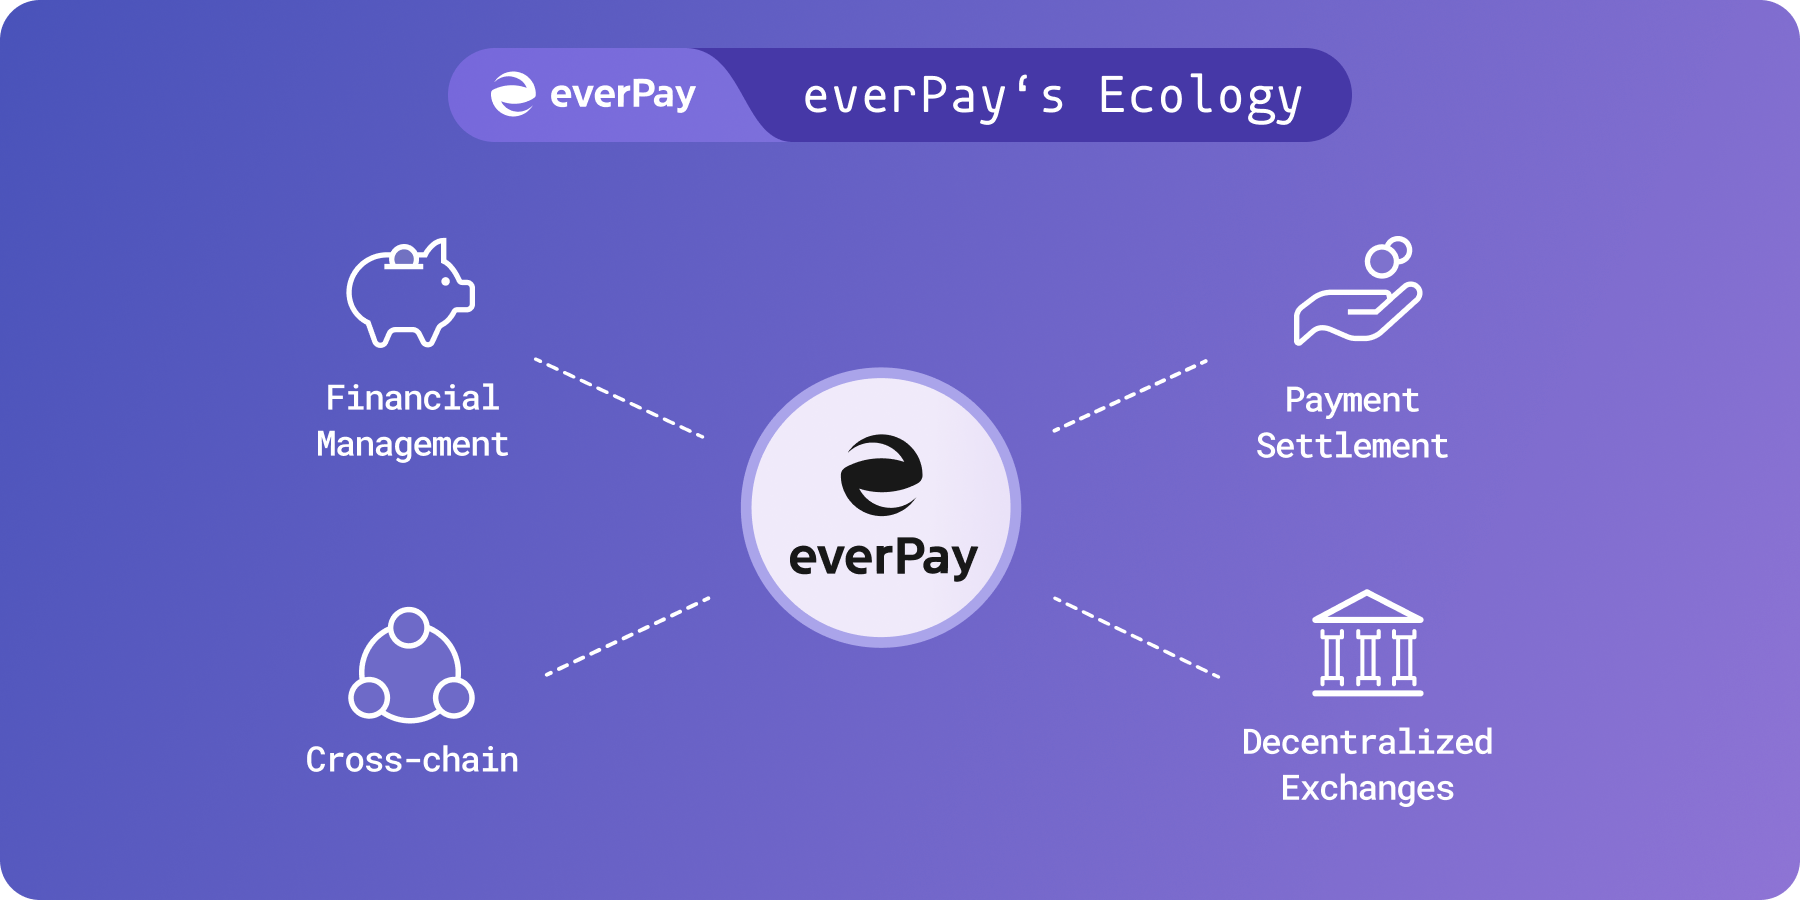 everPay's Ecology